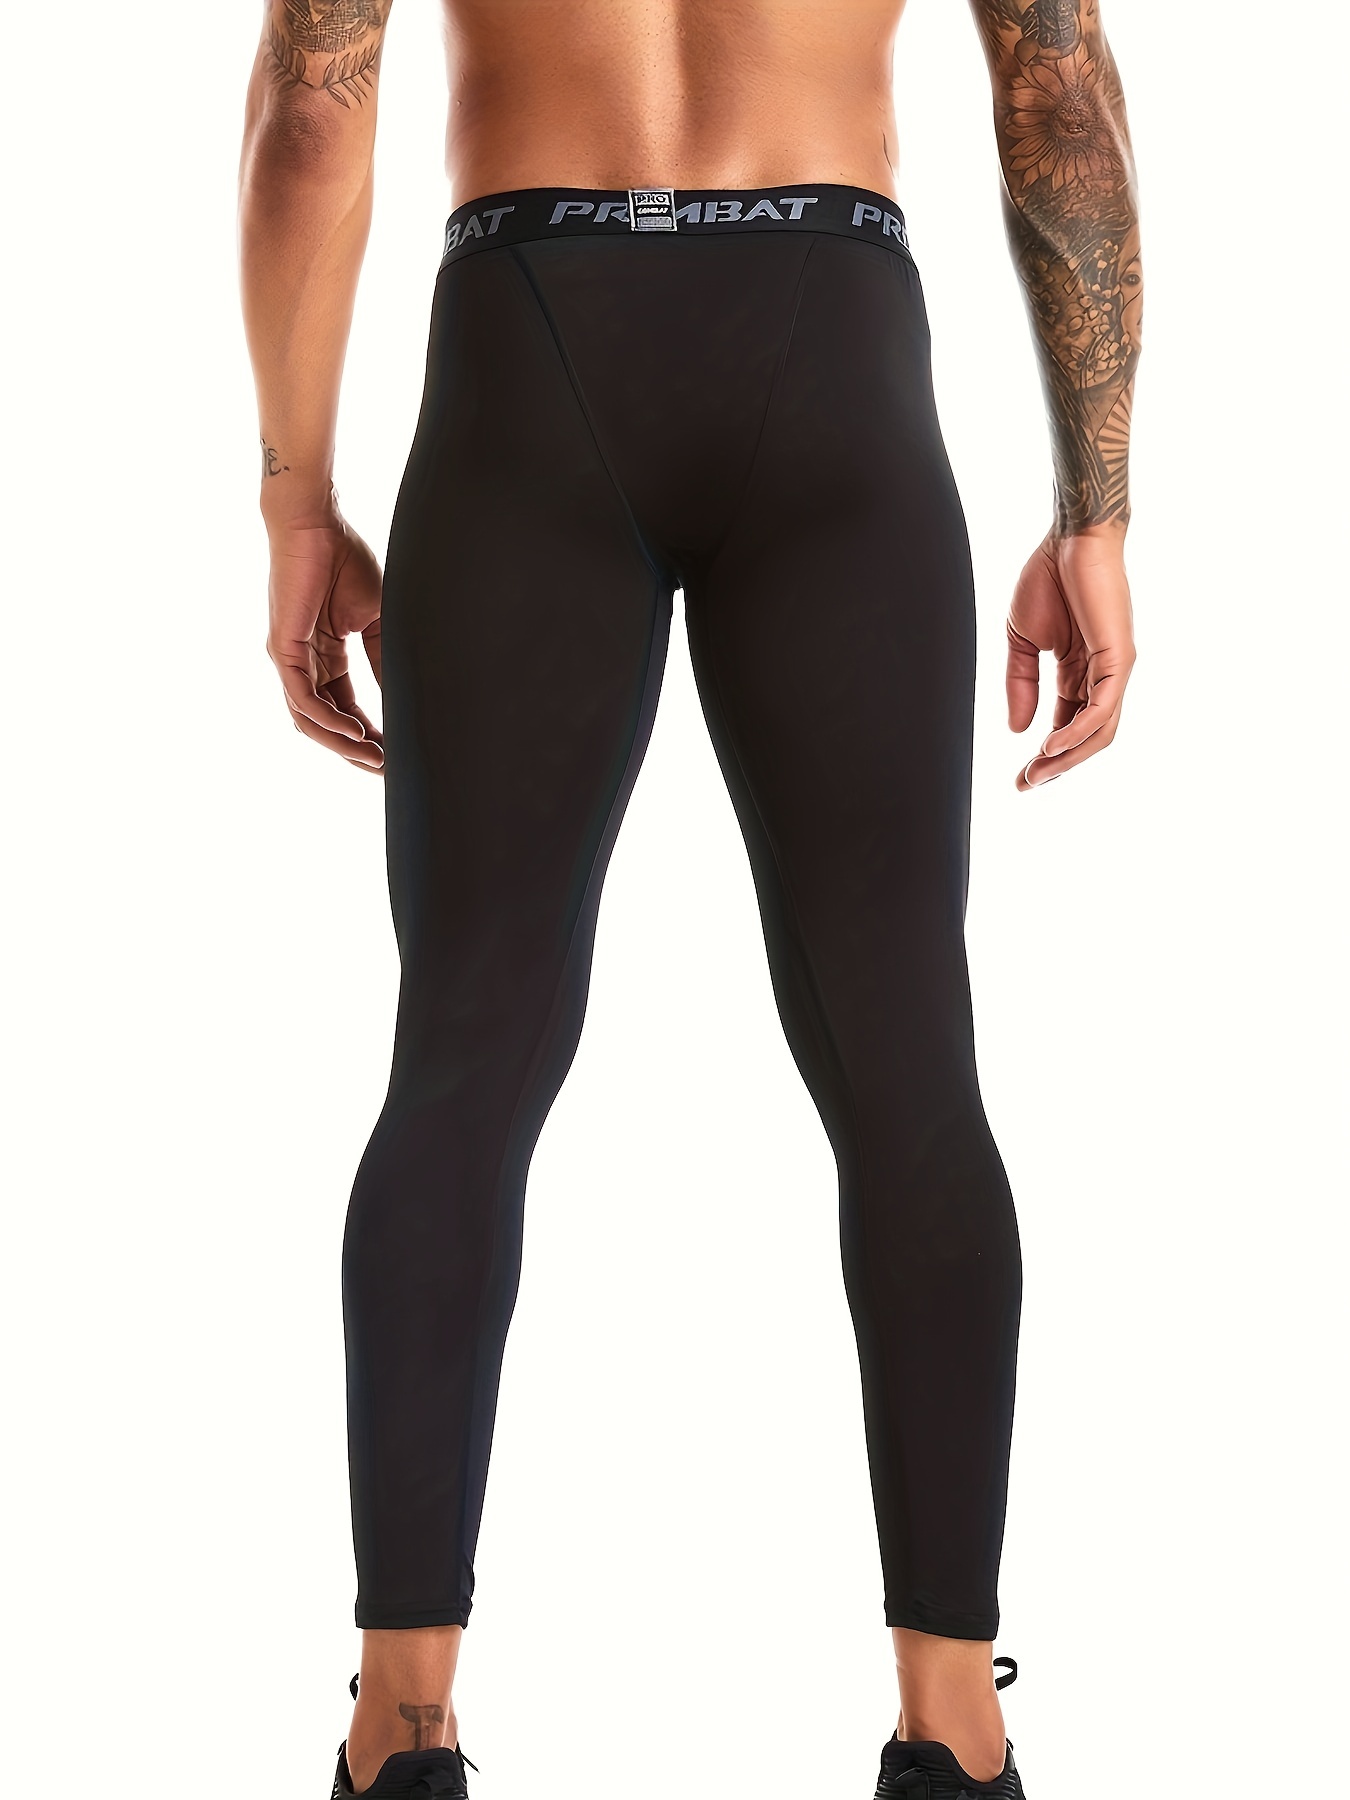 Mens Gym Sports Slim Fit Jogging Trousers Compression Base Layer Skin Tight  Leggings